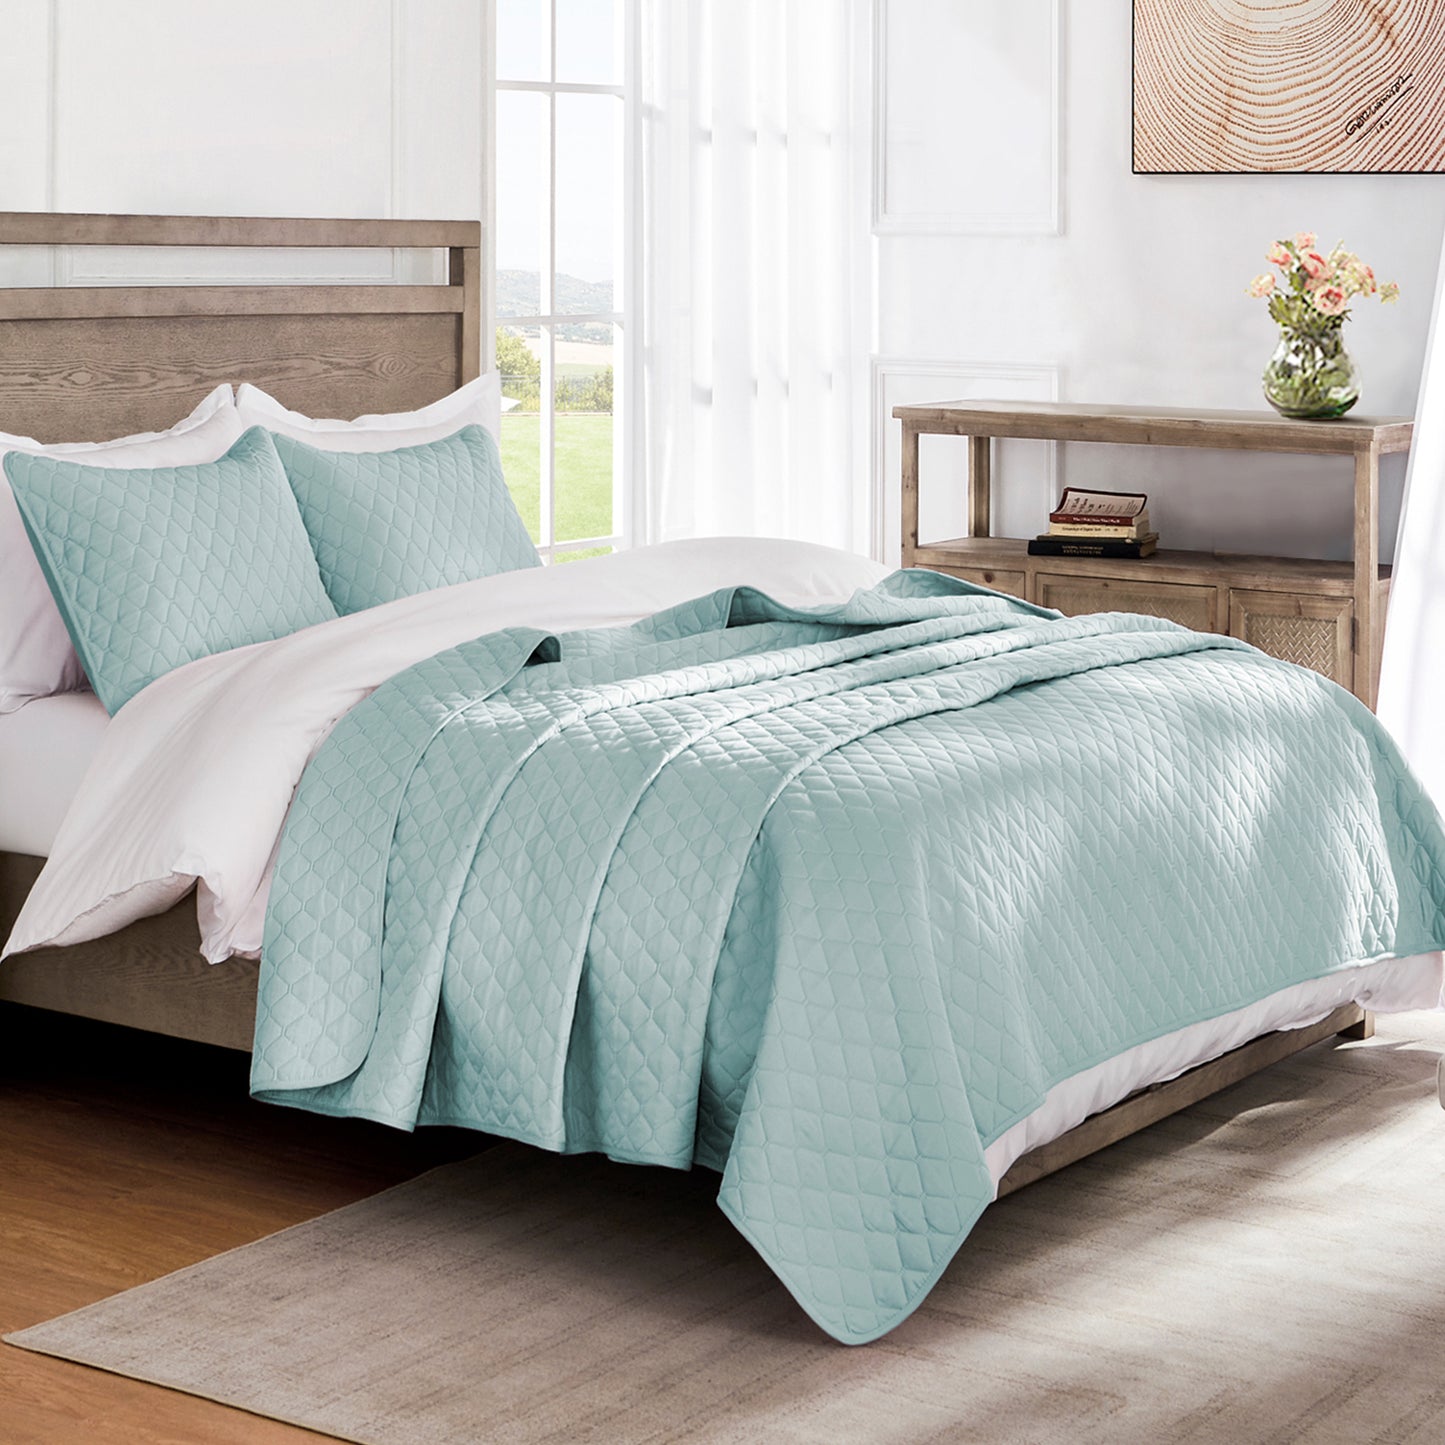 Exclusivo Mezcla Ultrasonic Reversible King Size Quilt Bedding Set with Pillow Shams, Lightweight Quilts King Size, Soft Bedspreads Bed Coverlets for All Seasons - (Aqua Blue, 104"x96")